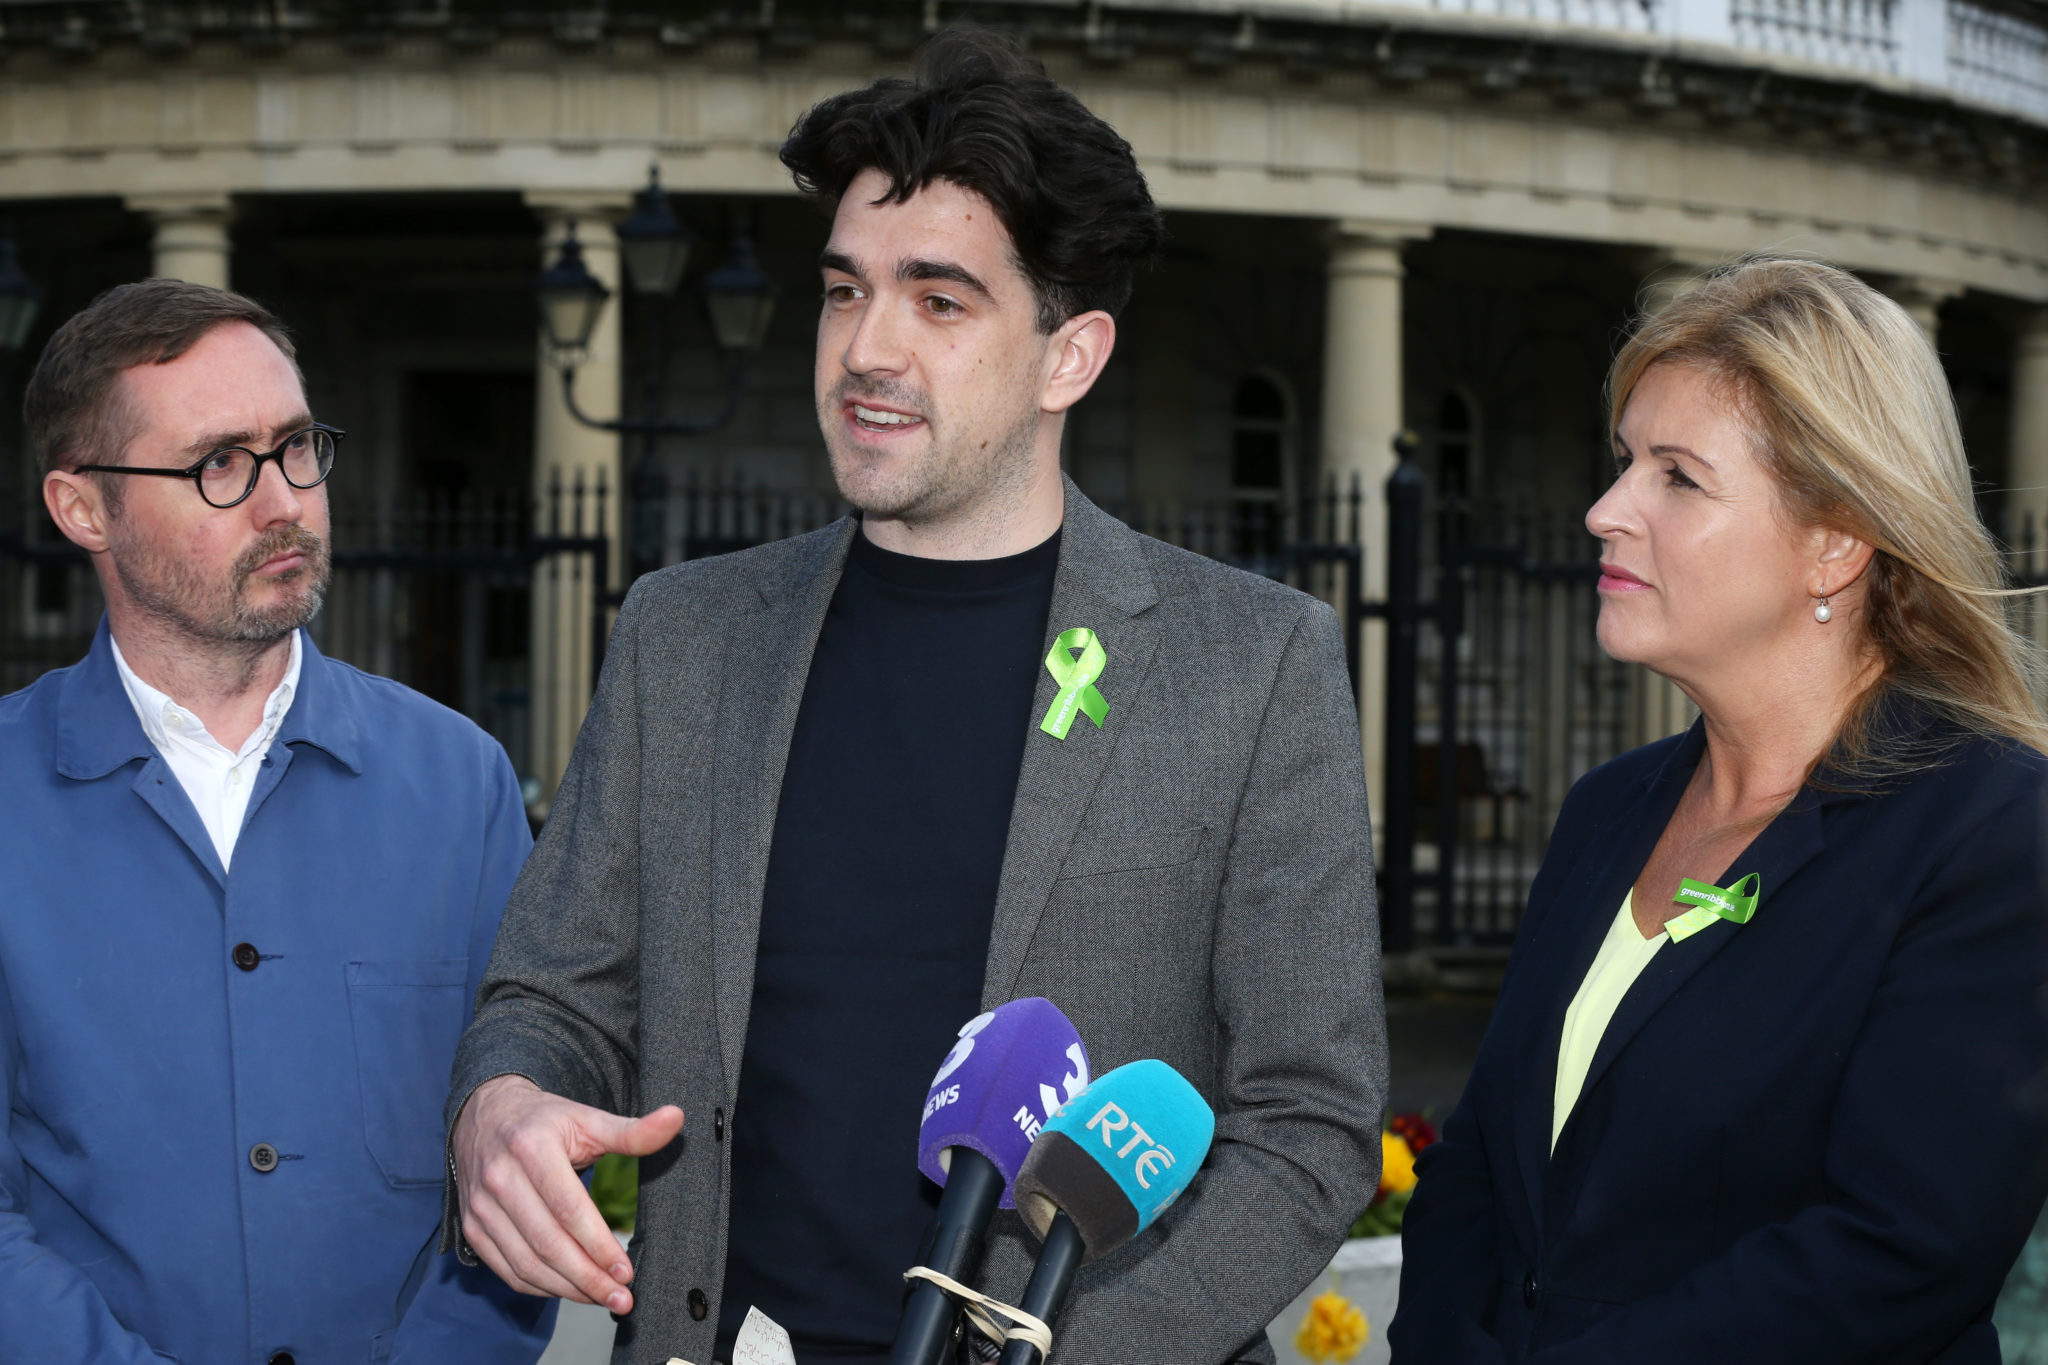 Sinn Féin Housing spokesperson Eoin Ó Broin with Senator Fintan Warfield and Senator Rose Conway Walsh talking to the media on the plinth at Leinster House